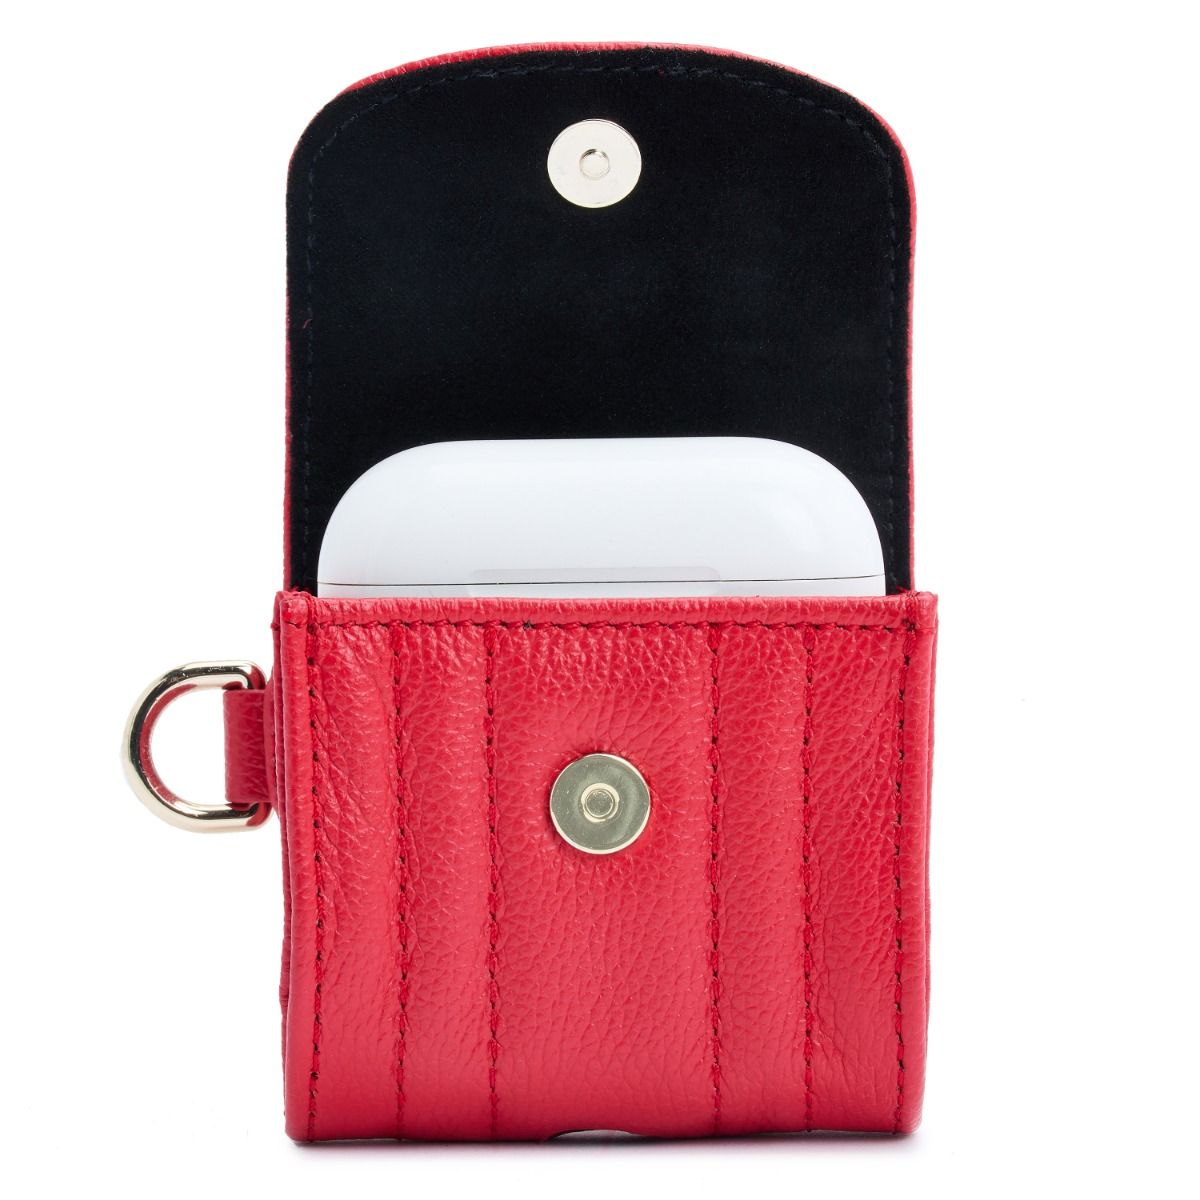 Wolf Mimi Earpods Case with Wristlet Red